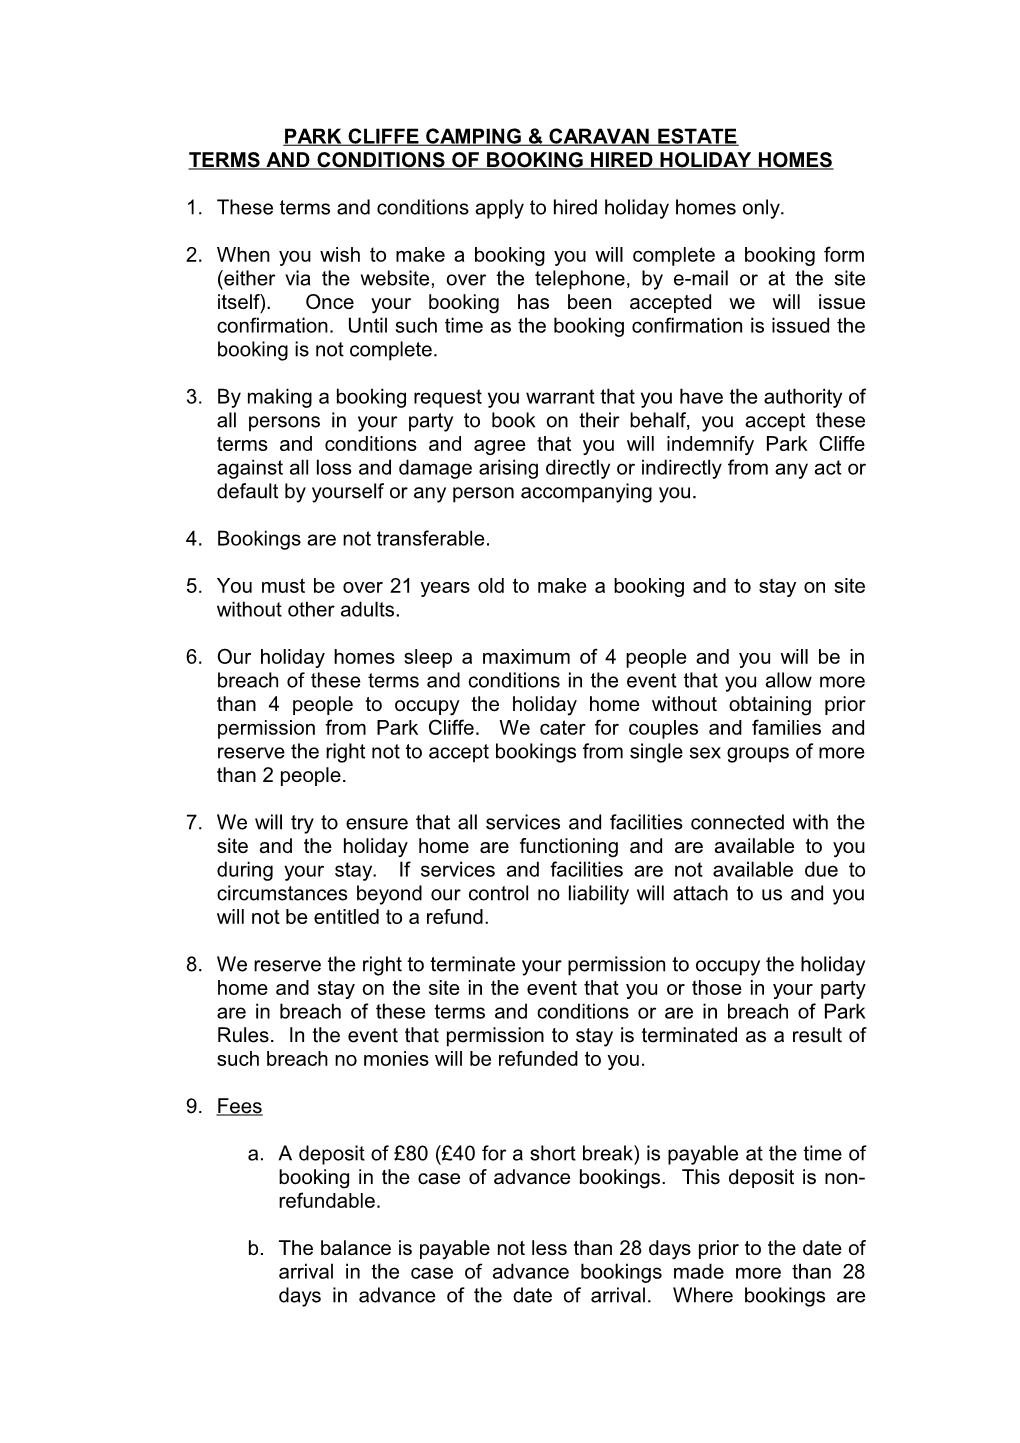 Terms and Conditions of Booking Hired Holiday Homes